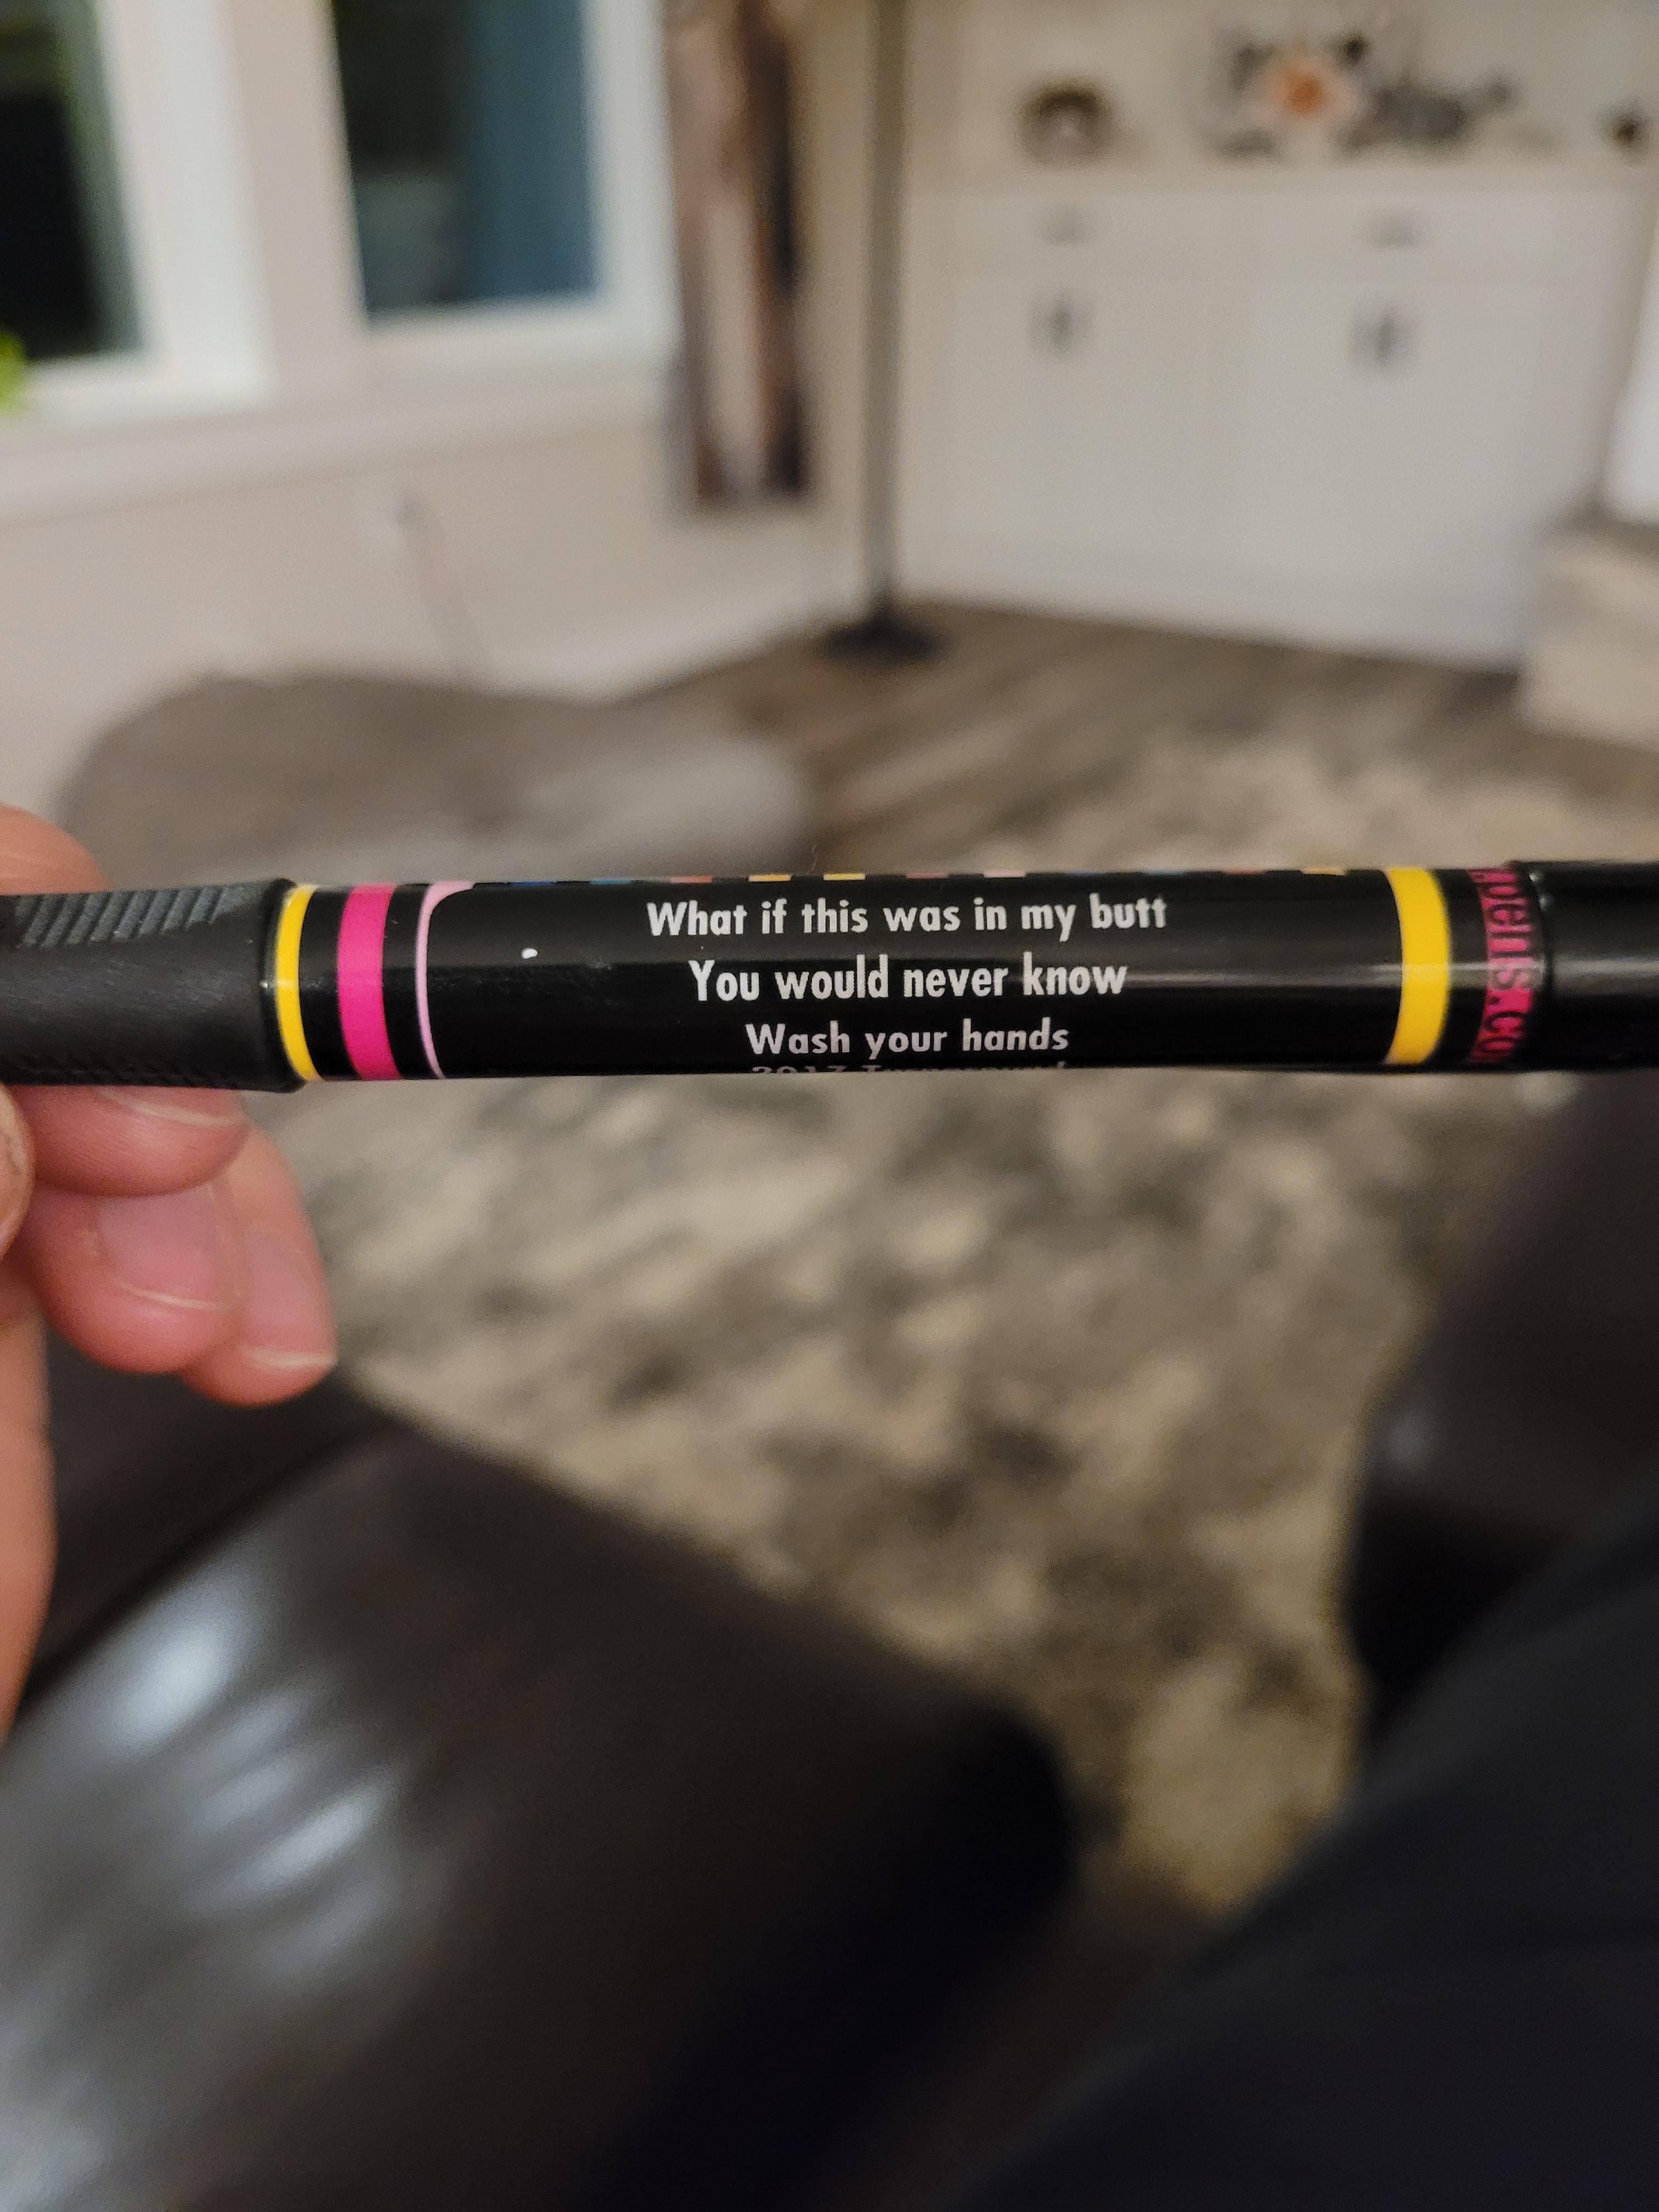 A few years ago a buddy and i had 300 pens made that said this. Gave them away everywhere. We still find them now and again.